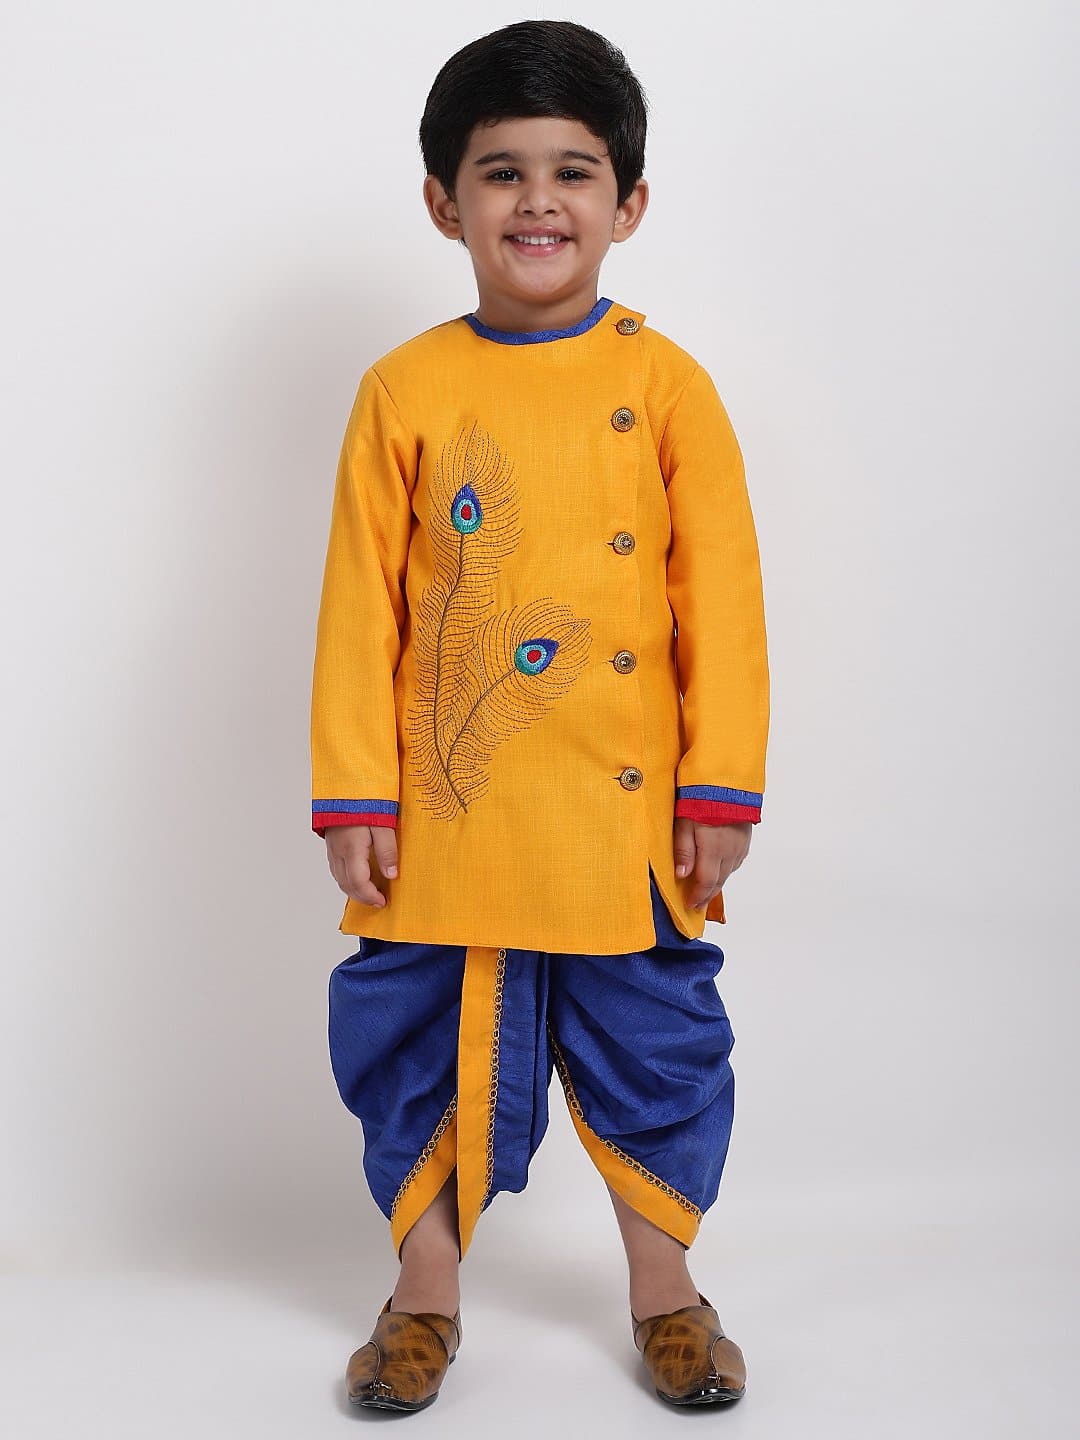 Fancy Dresses Krishna Dress for Kids, Baby Krishna Dress for Janmashtami  with Krishna's Flute Embroidered Krishna Costume for Girl & Boy (18-24  Months, YELLOW) : Amazon.in: Clothing & Accessories